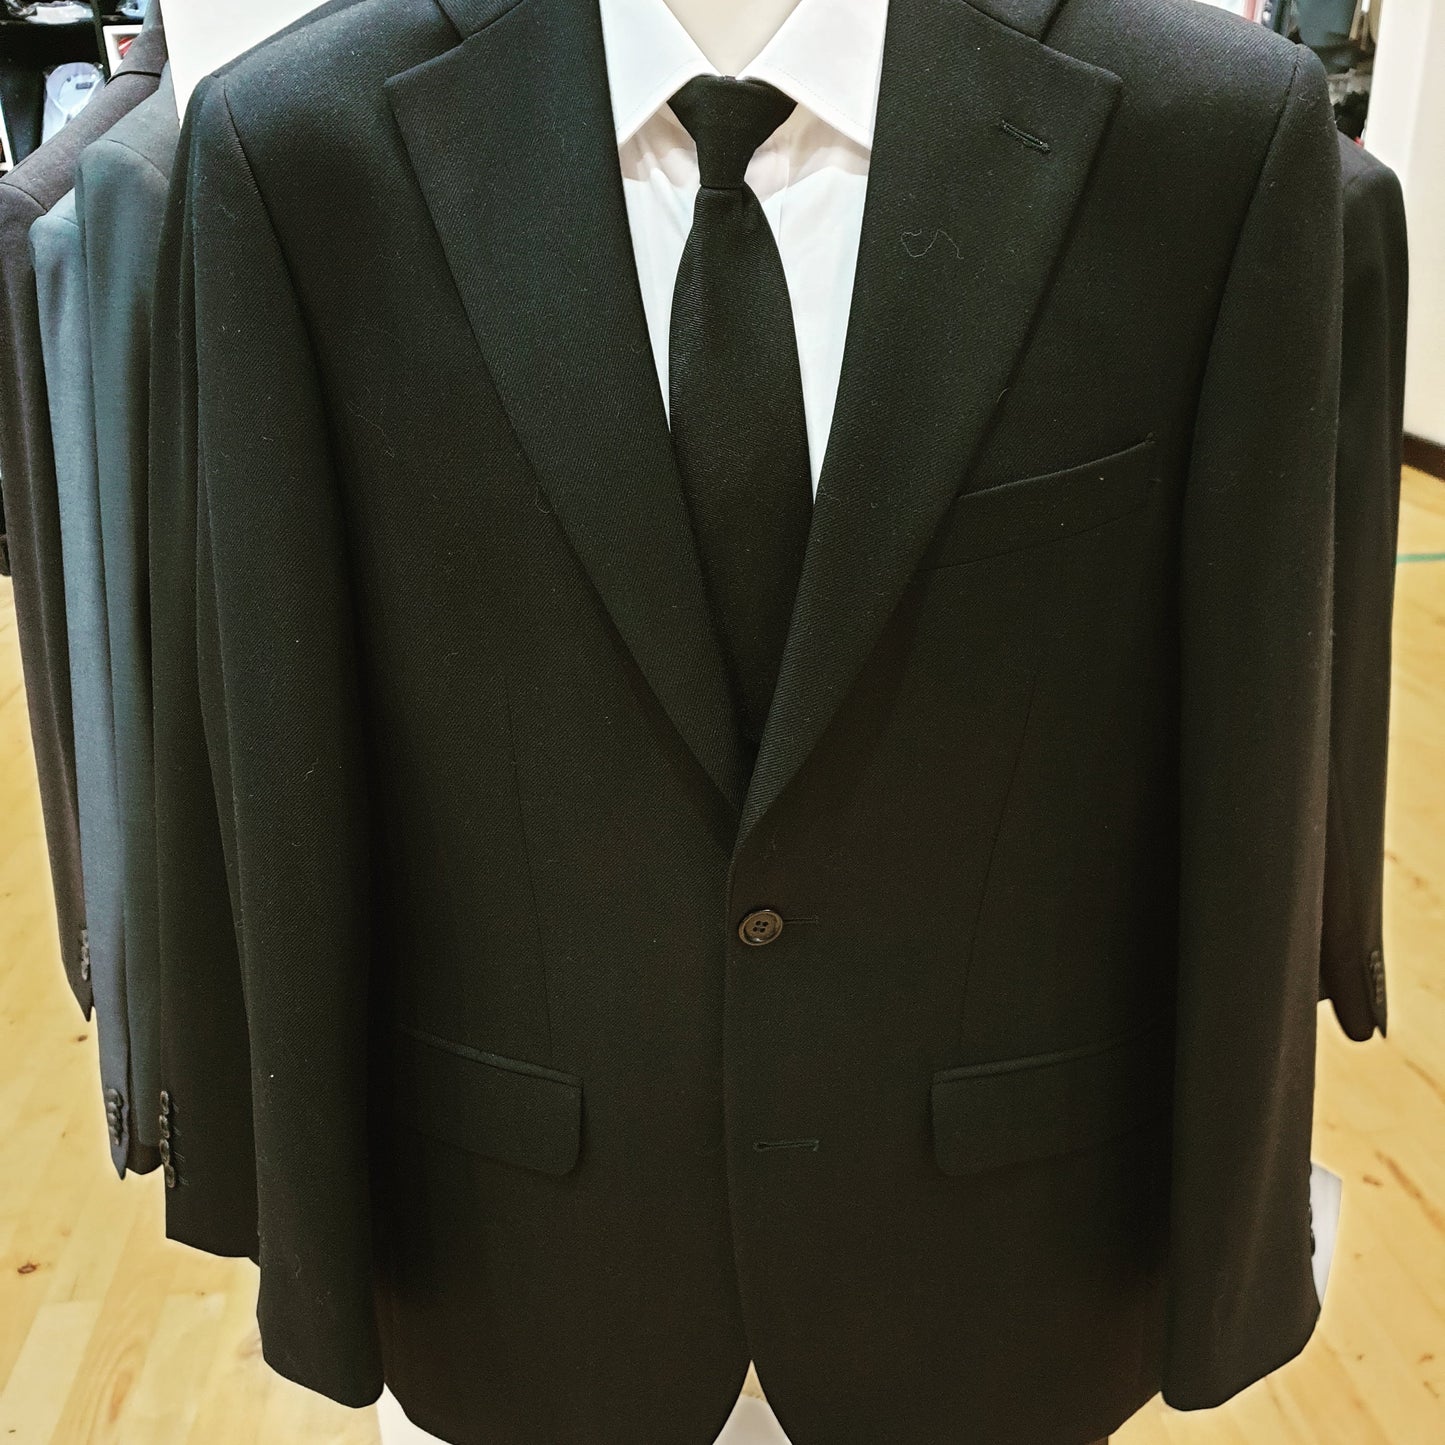 Funeral Suit ( for sale or hire )